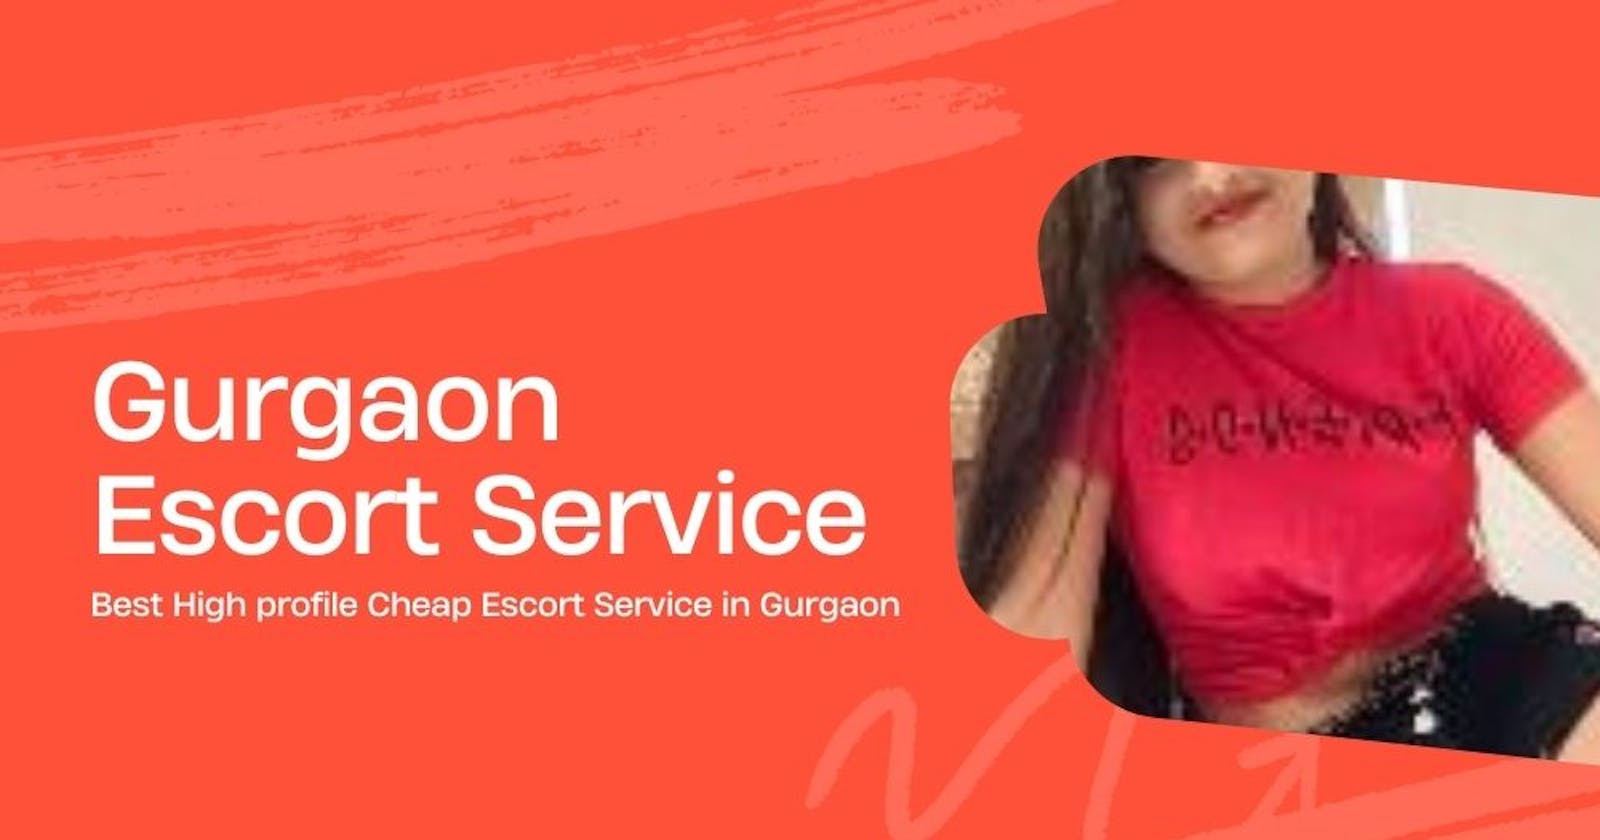 Get the Best Deals on Gurgaon Escort Service Near Your Location